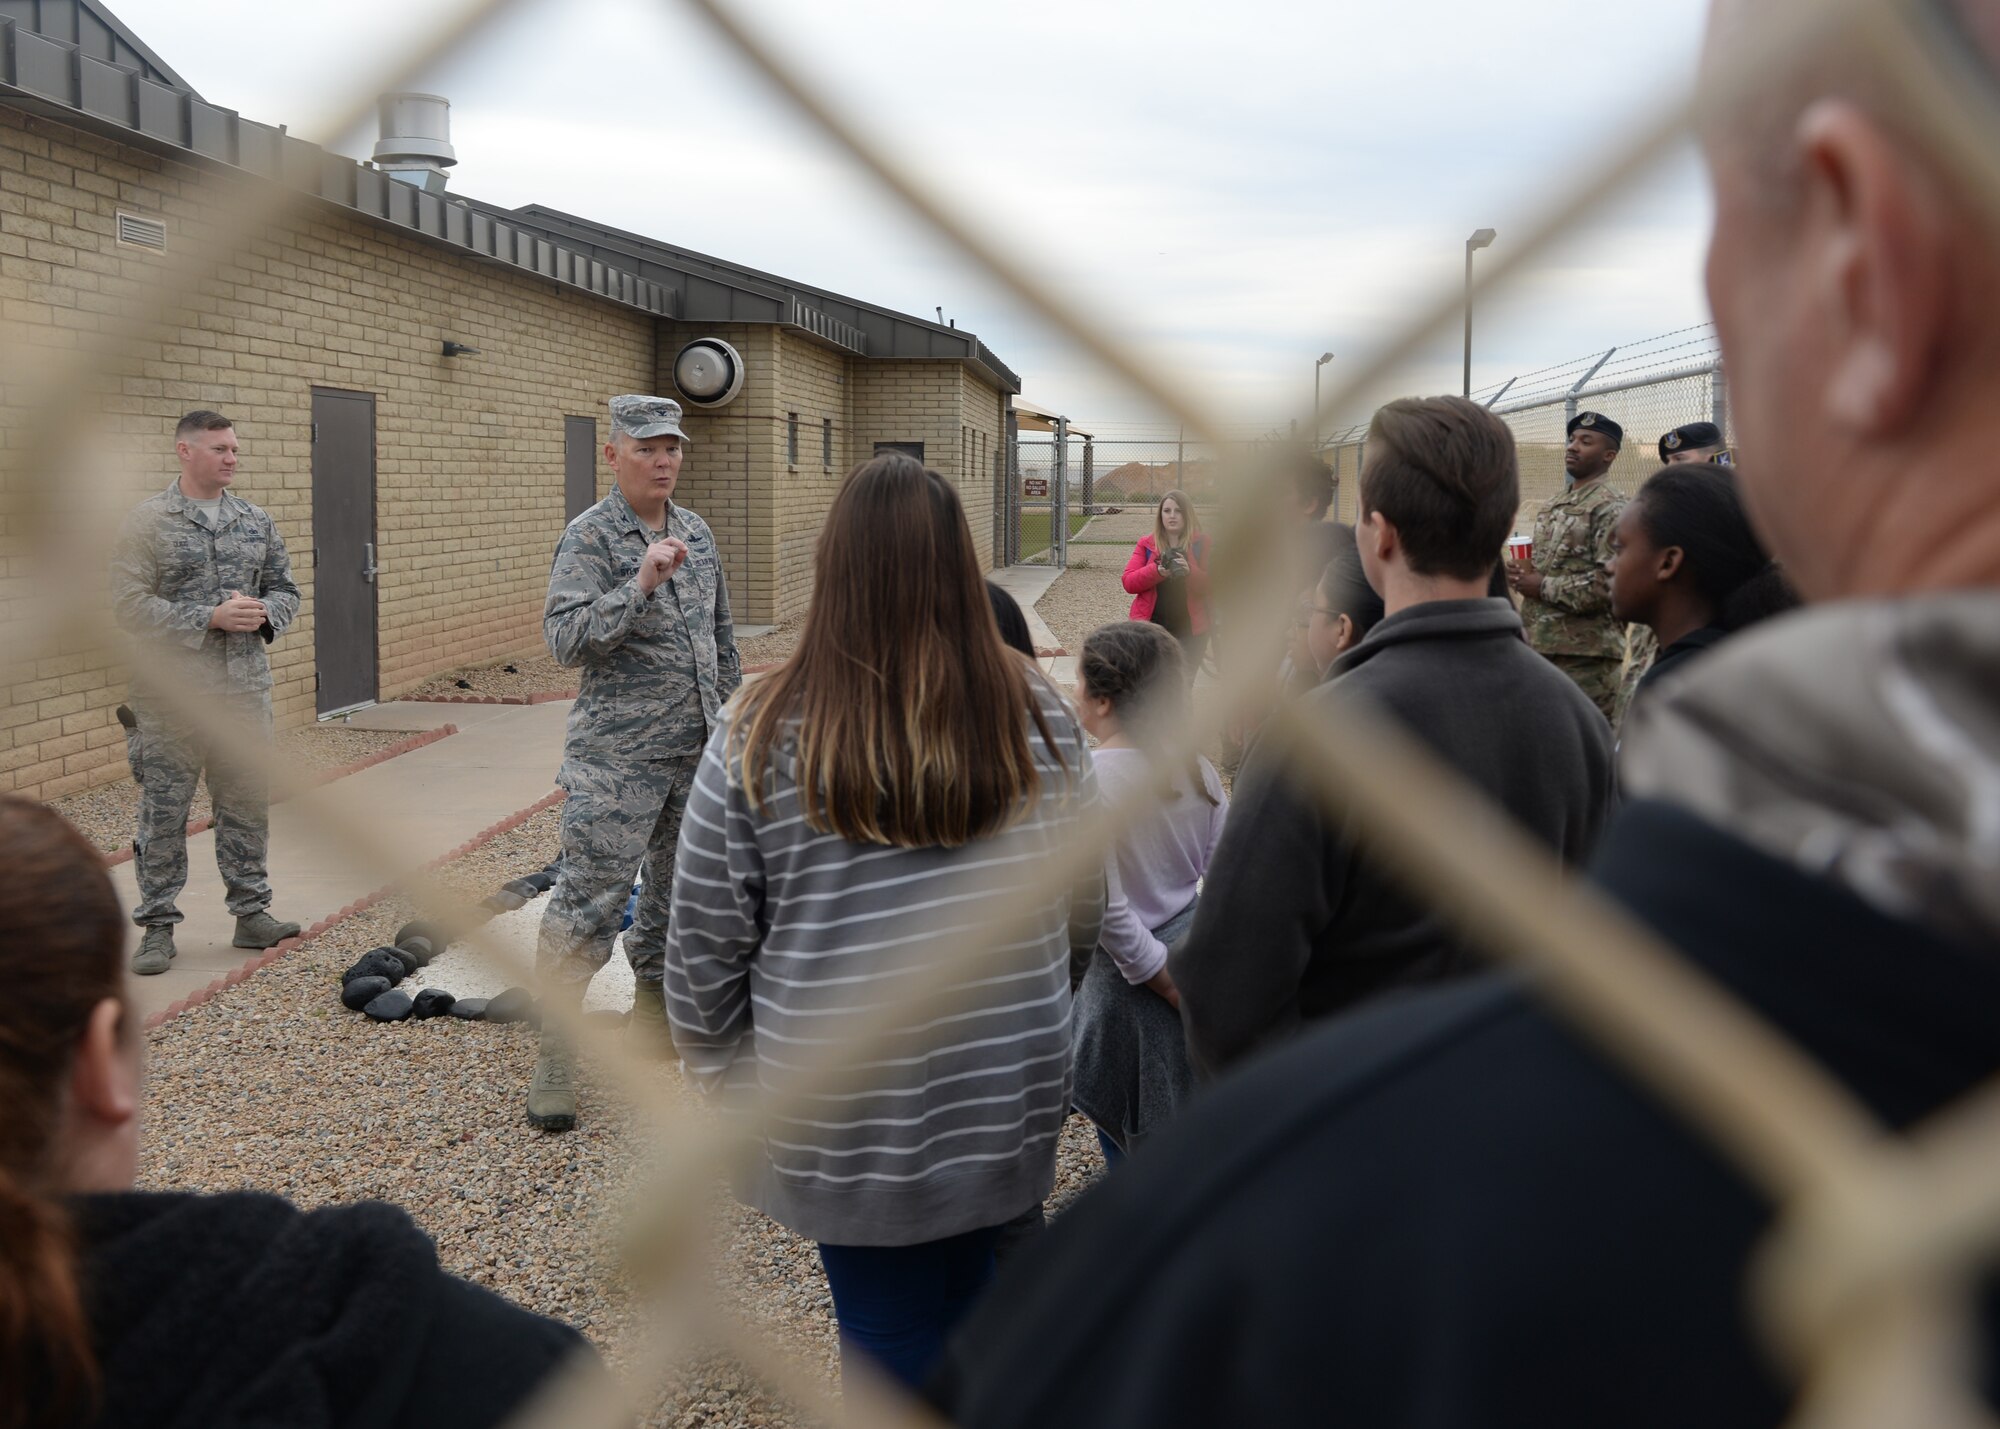 Col. Robert Sylvester, 56th Mission Support Group commander speaks to the children of Childhelp during the “Day of Hope” event at Luke Air Force Base, Ariz., Dec. 21, 2018.